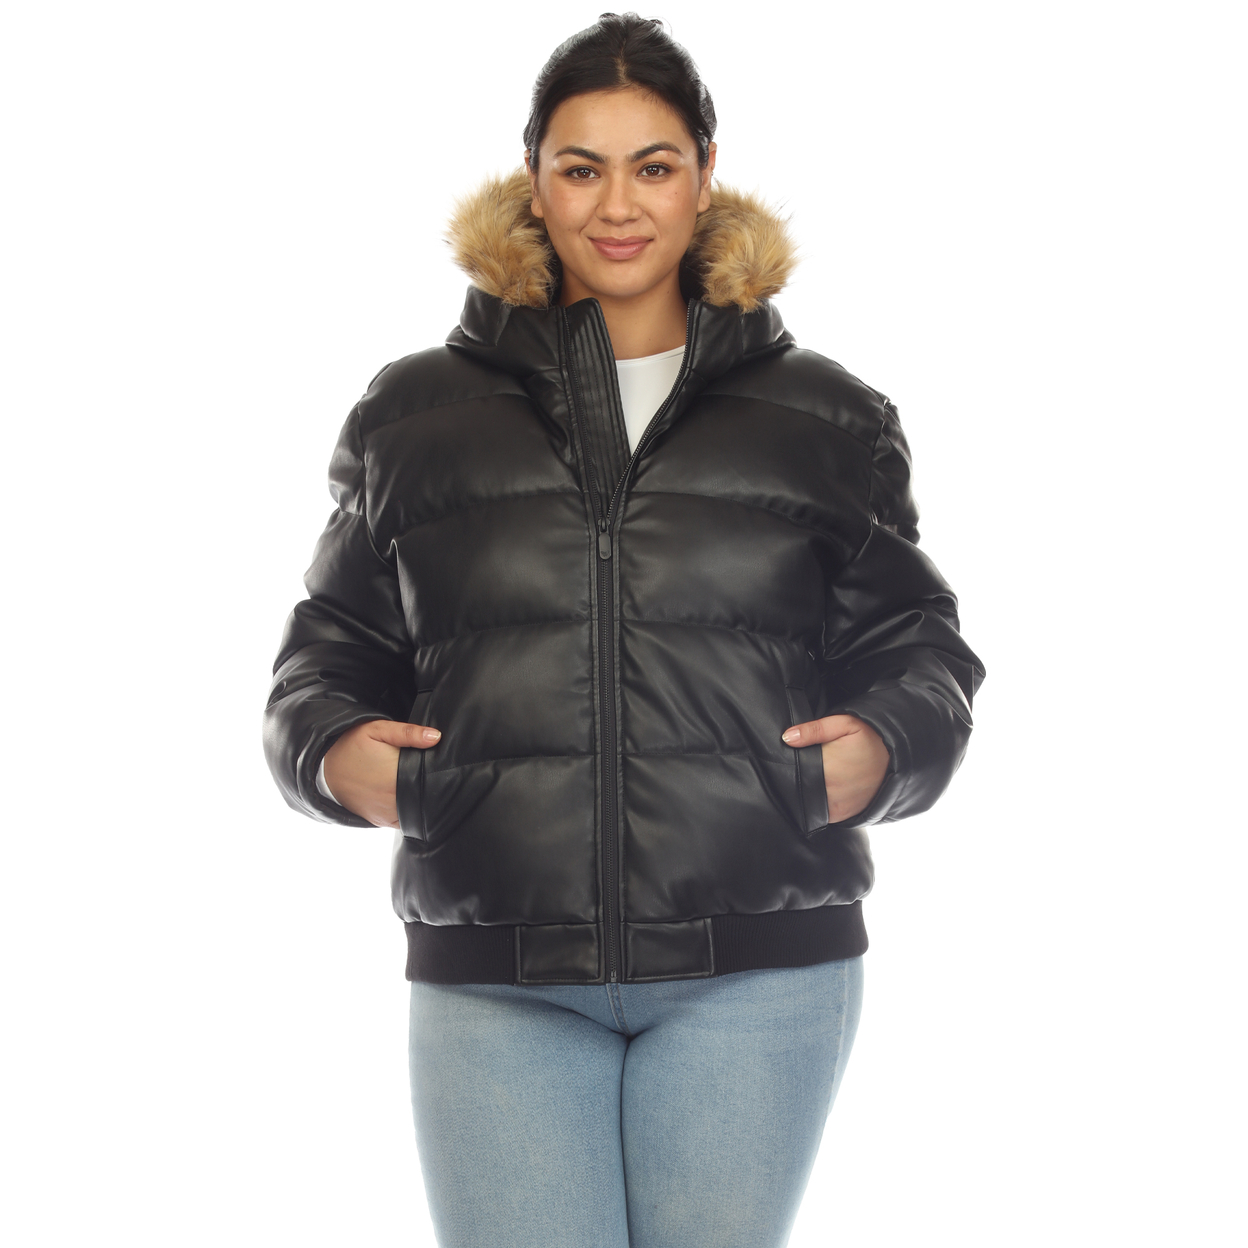 White Mark Women's Removable Fur Hoodie PU Leather Puffer Jacket - Black, 1x